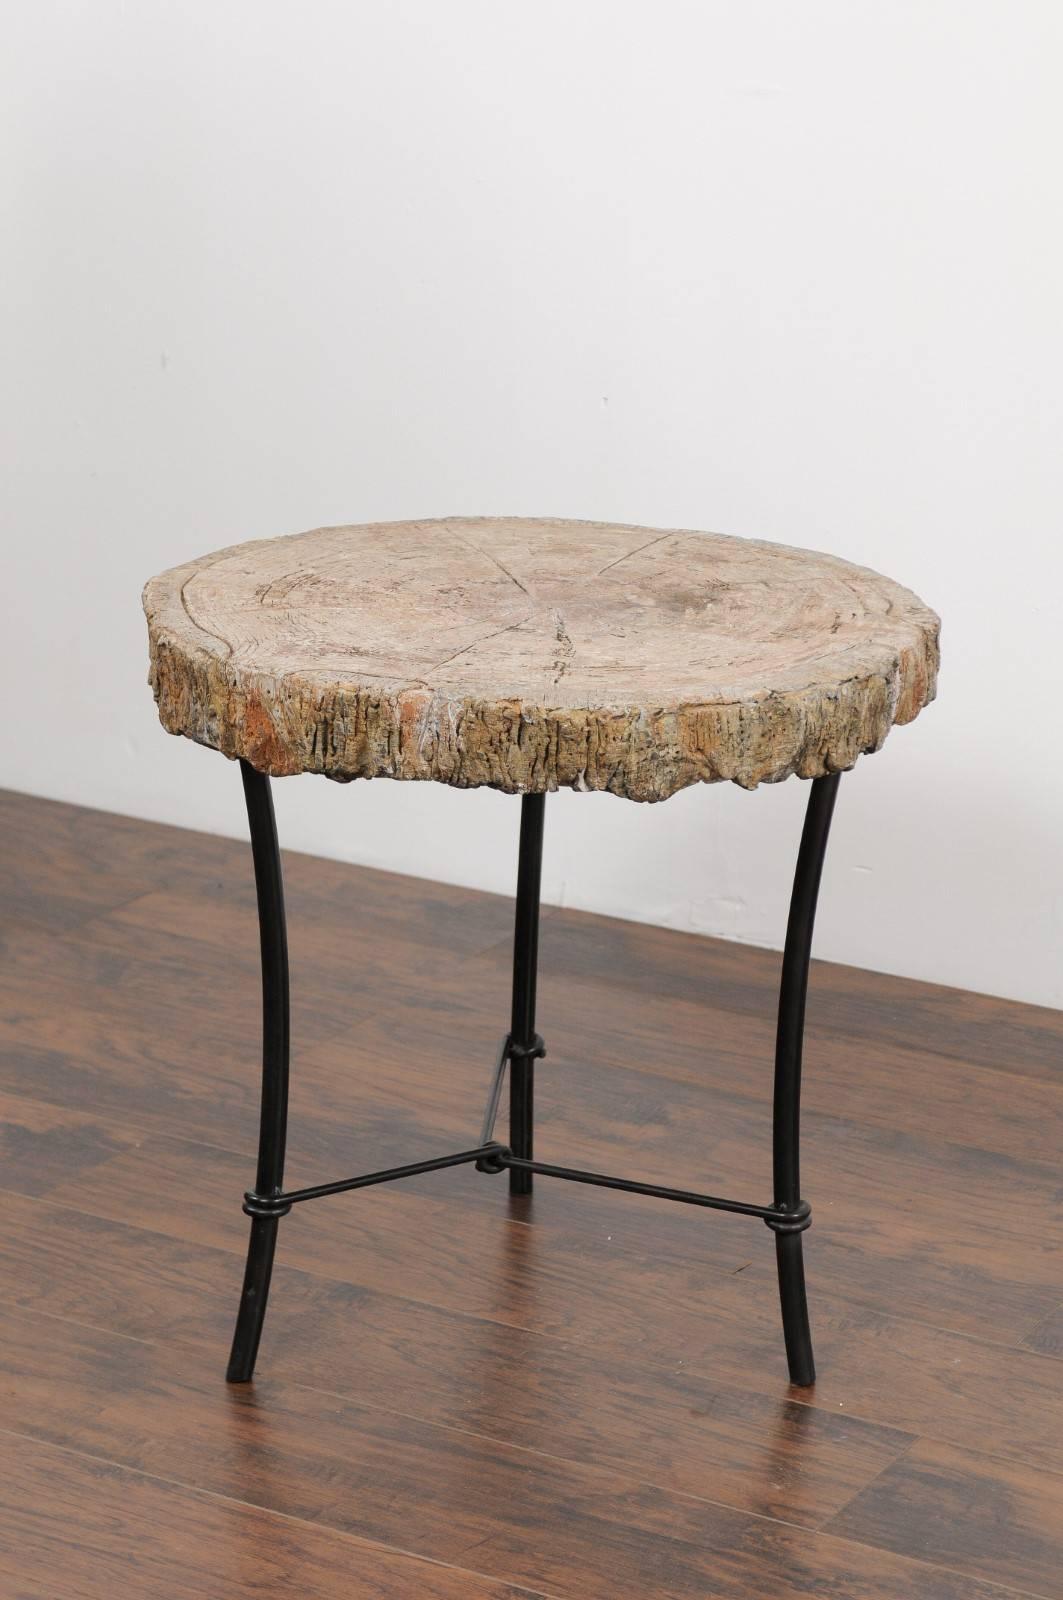 A large French faux-bois stone side table from the early 20th century mounted on a custom iron base. This French side table features a round light-colored faux-bois top, sitting above a custom-made iron base made of three splayed legs connected to